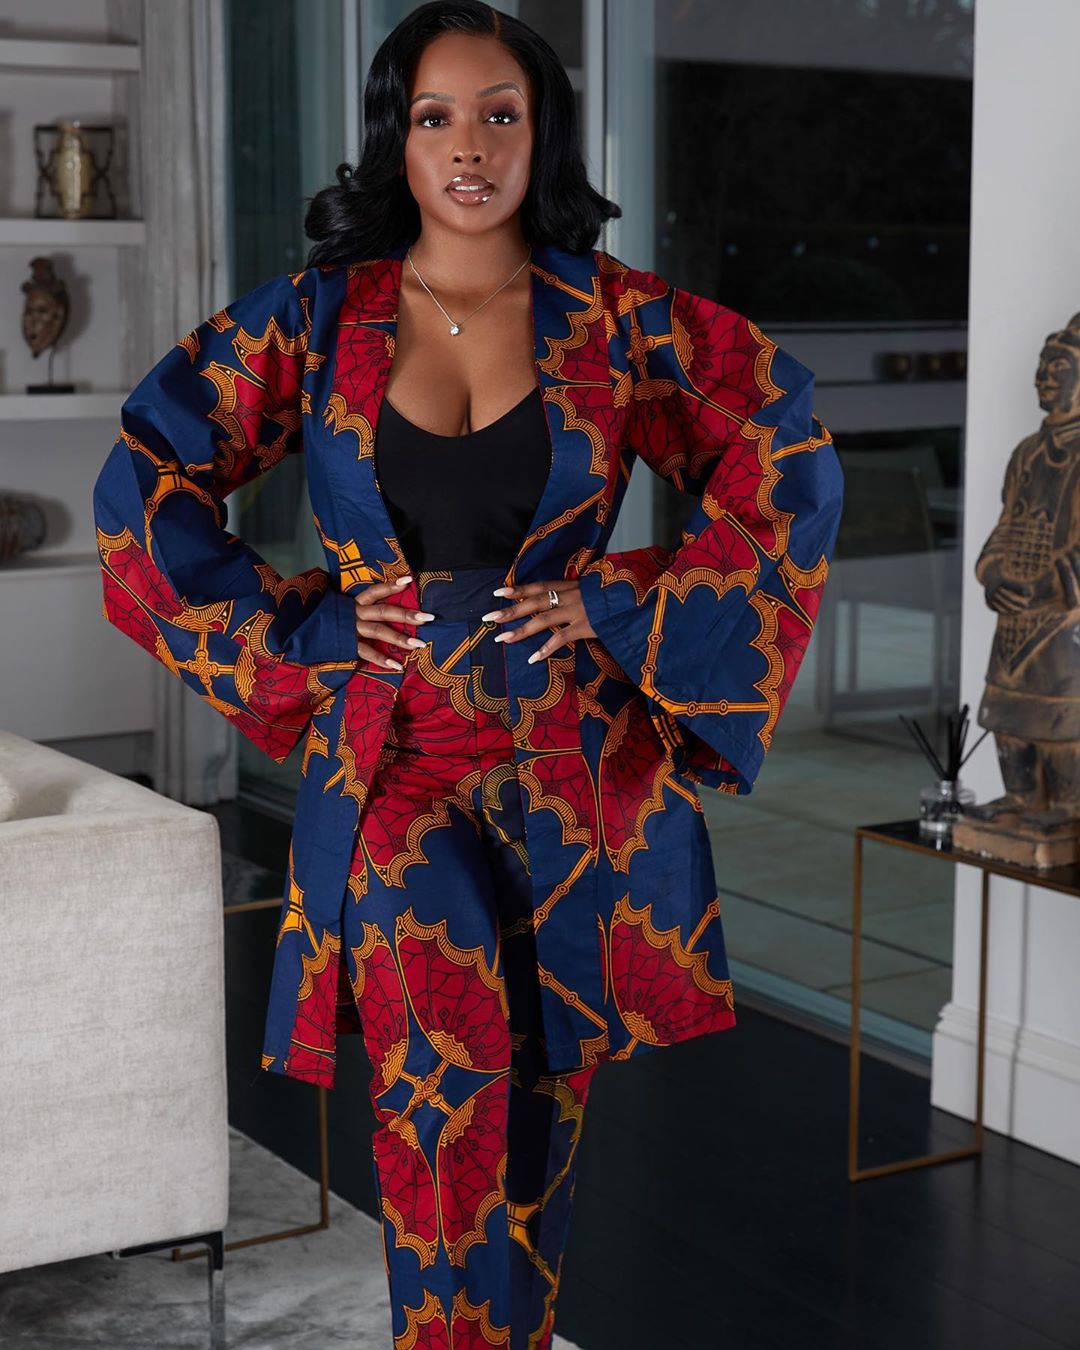 African Dresses and Styles 2020: Best African Dresses for Ladies